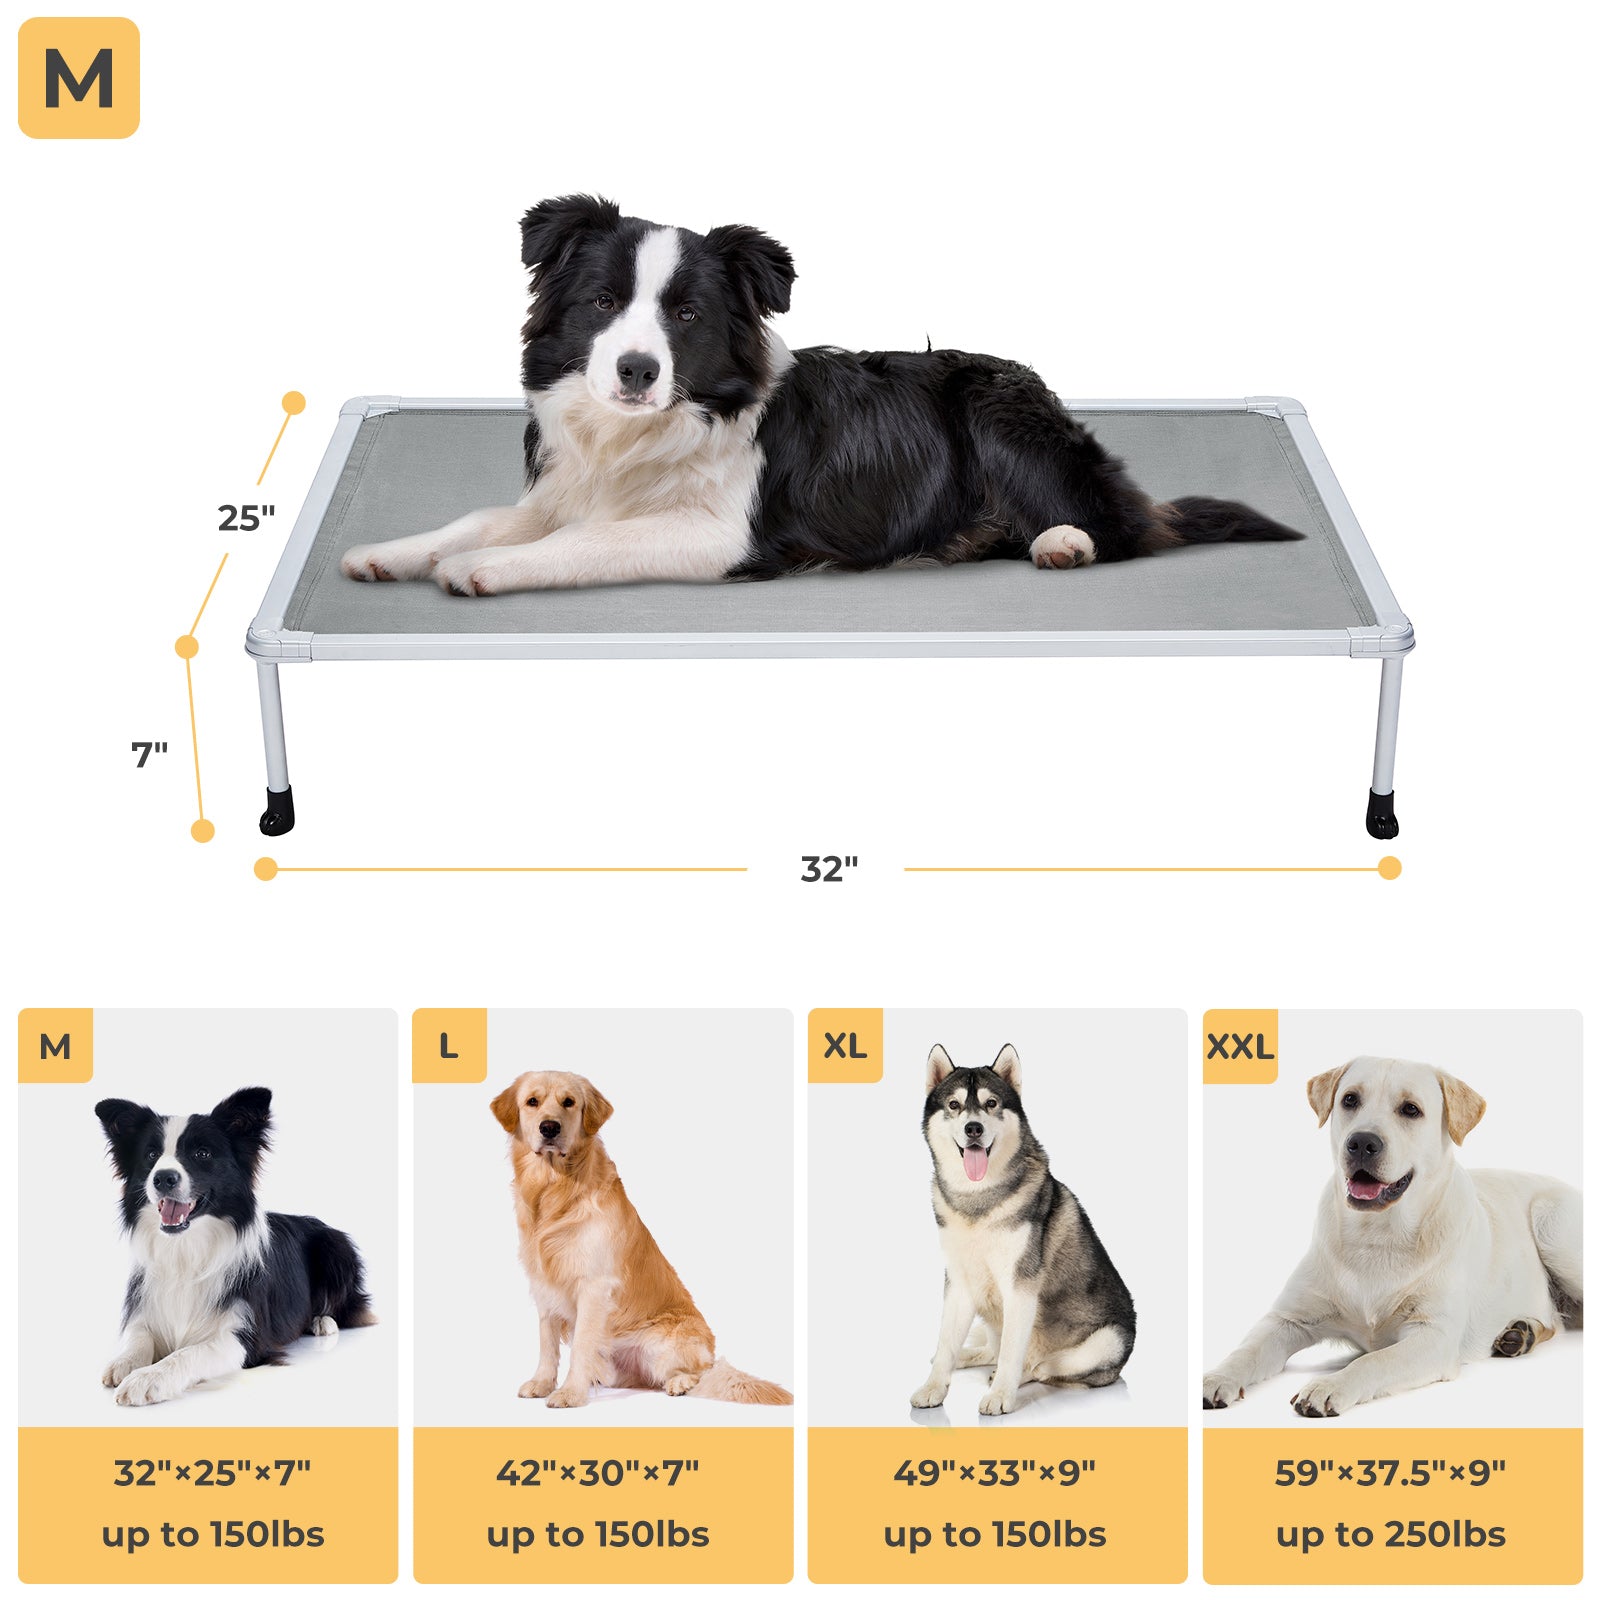 Veehoo Chewproof Dog Bed， Cooling Raised Dog Cots with Silver Metal Frame， Medium， Silver Grey